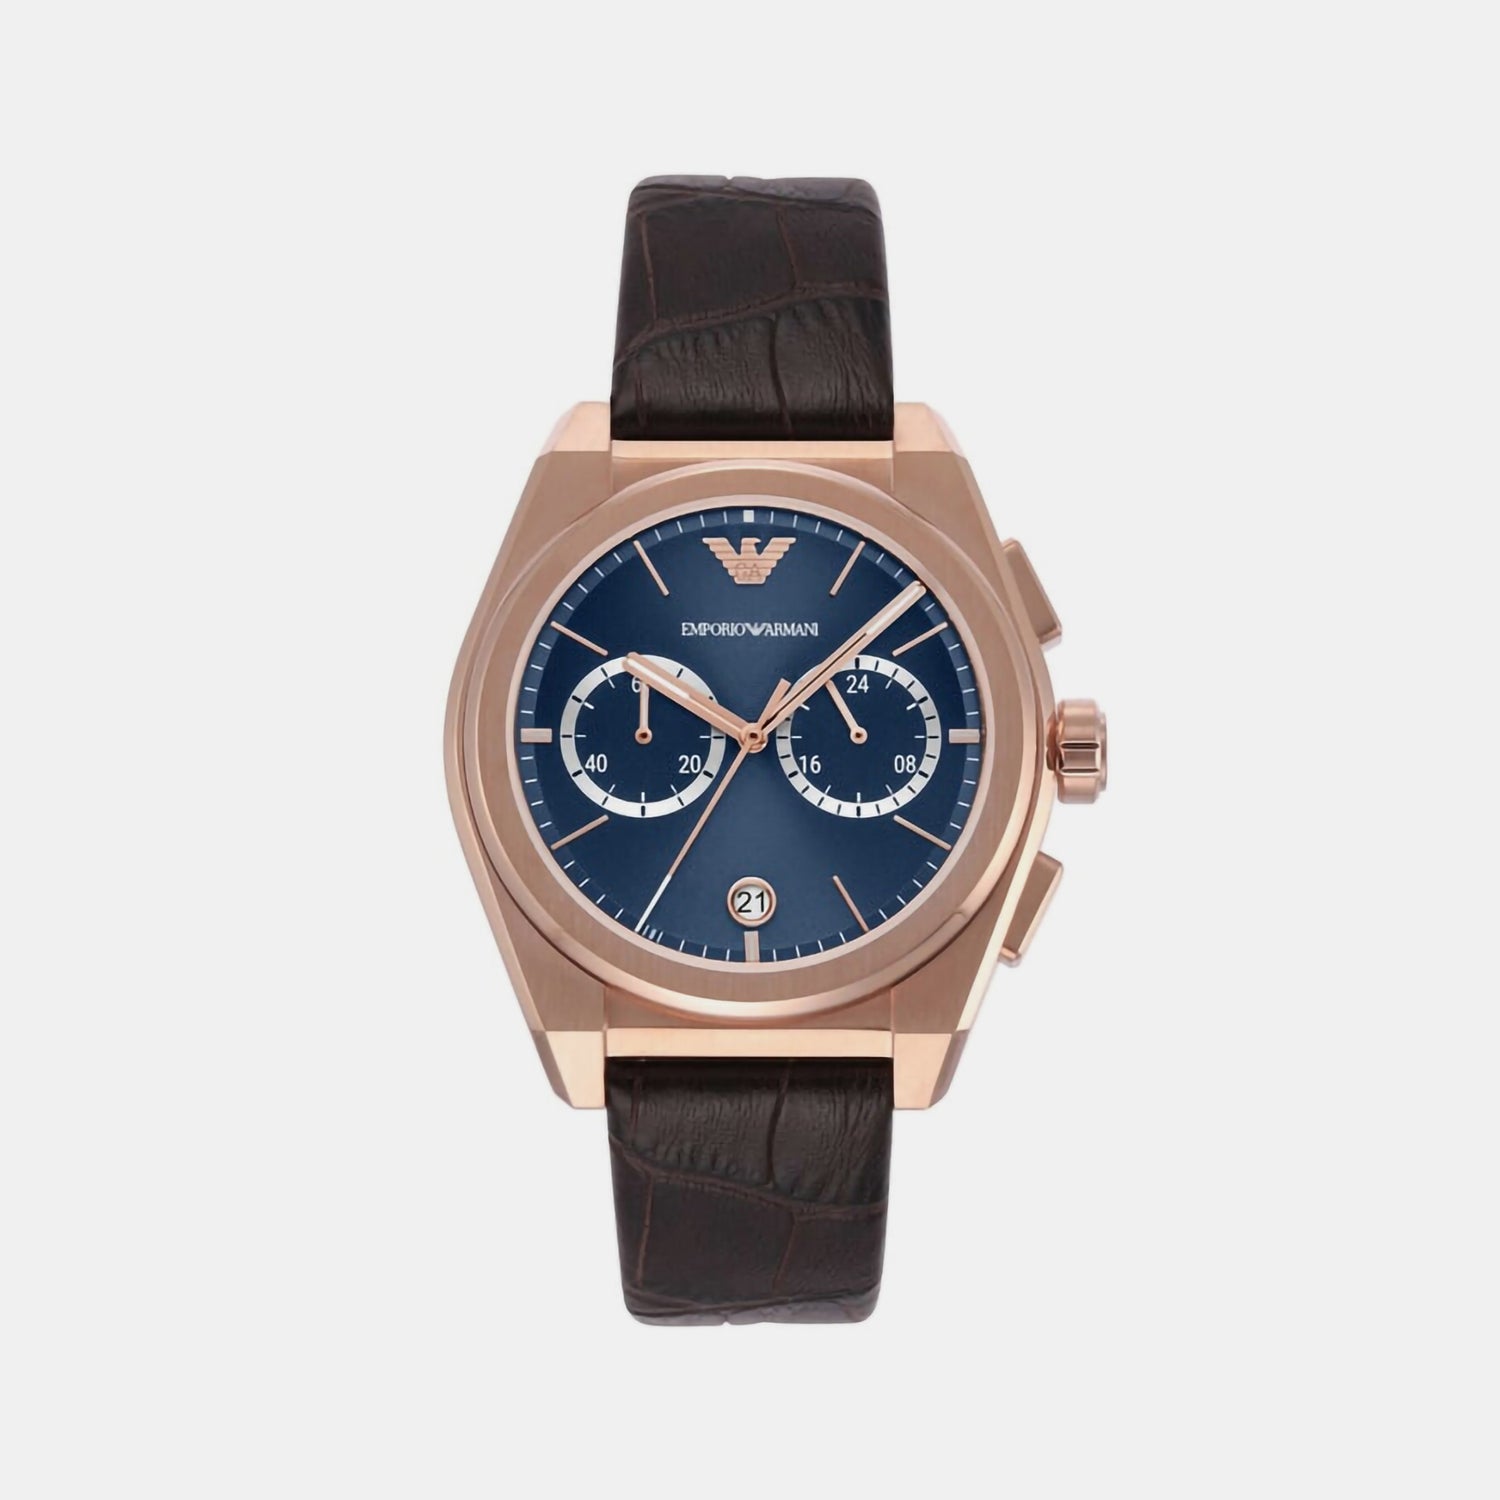 Male Blue Chronograph Leather Watch AR11563 – Just In Time